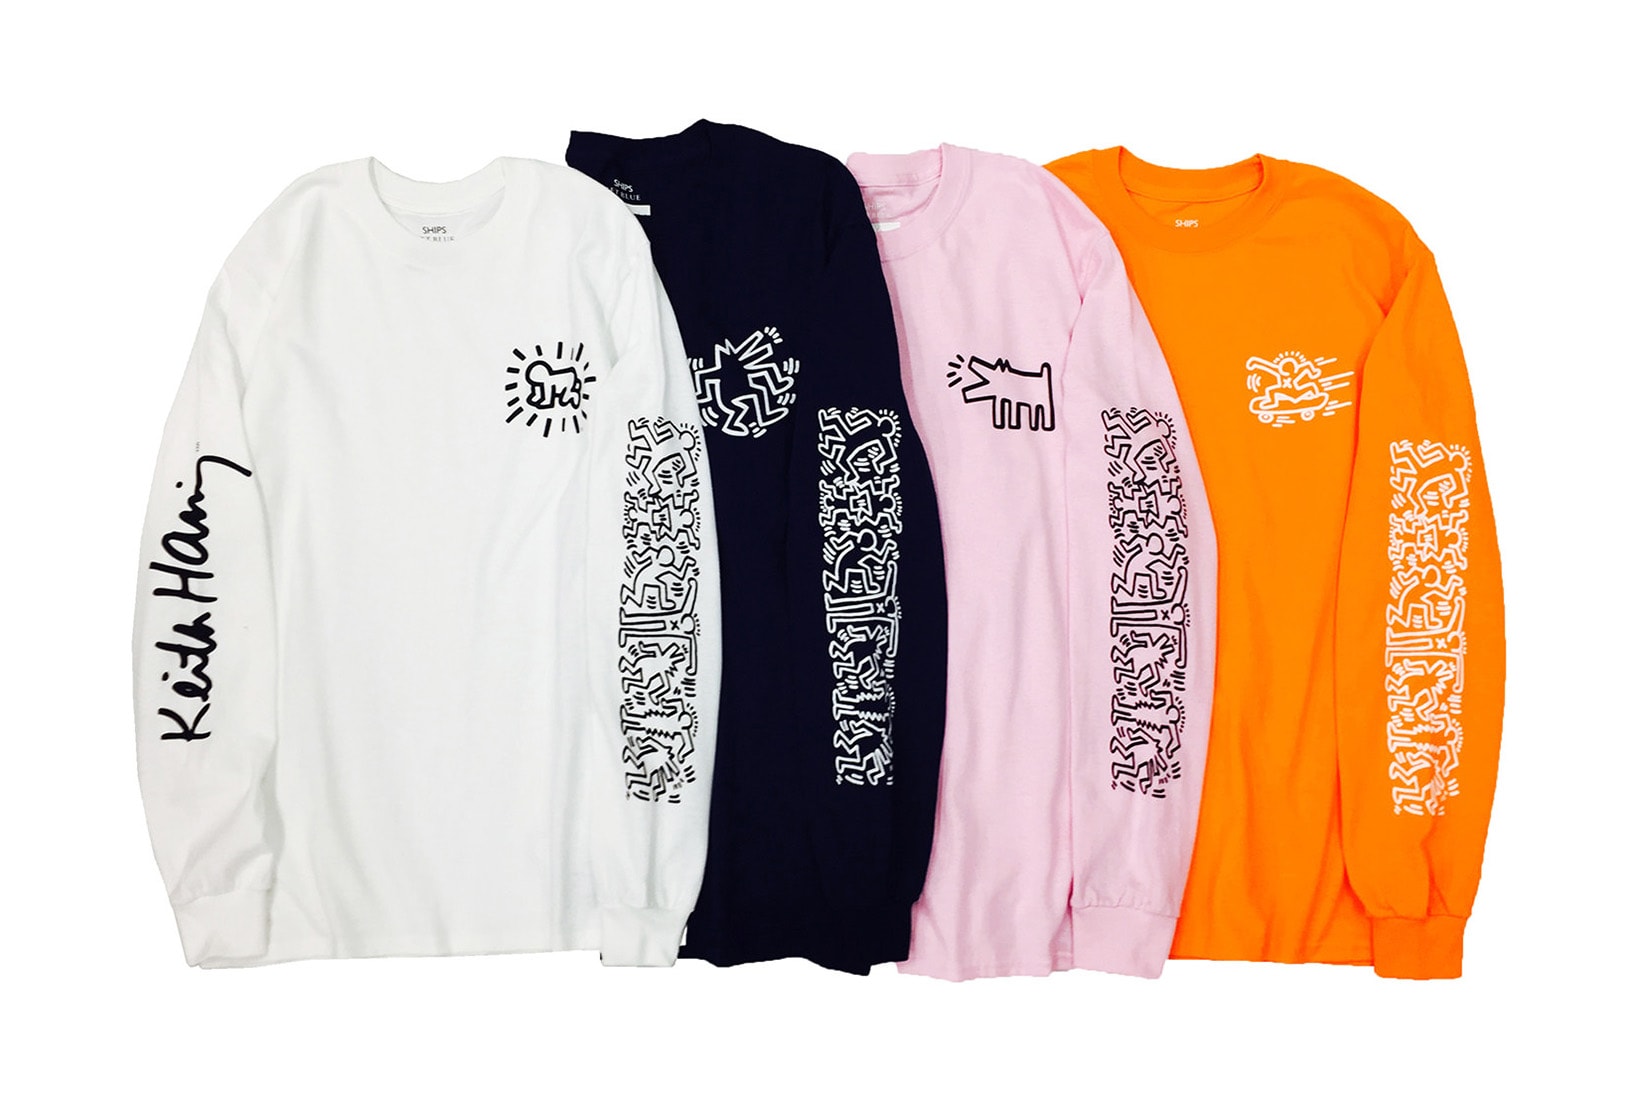 Keith Haring SHIPS JET BLUE Capsule Collection Collaboration 2017 October Release Date Info